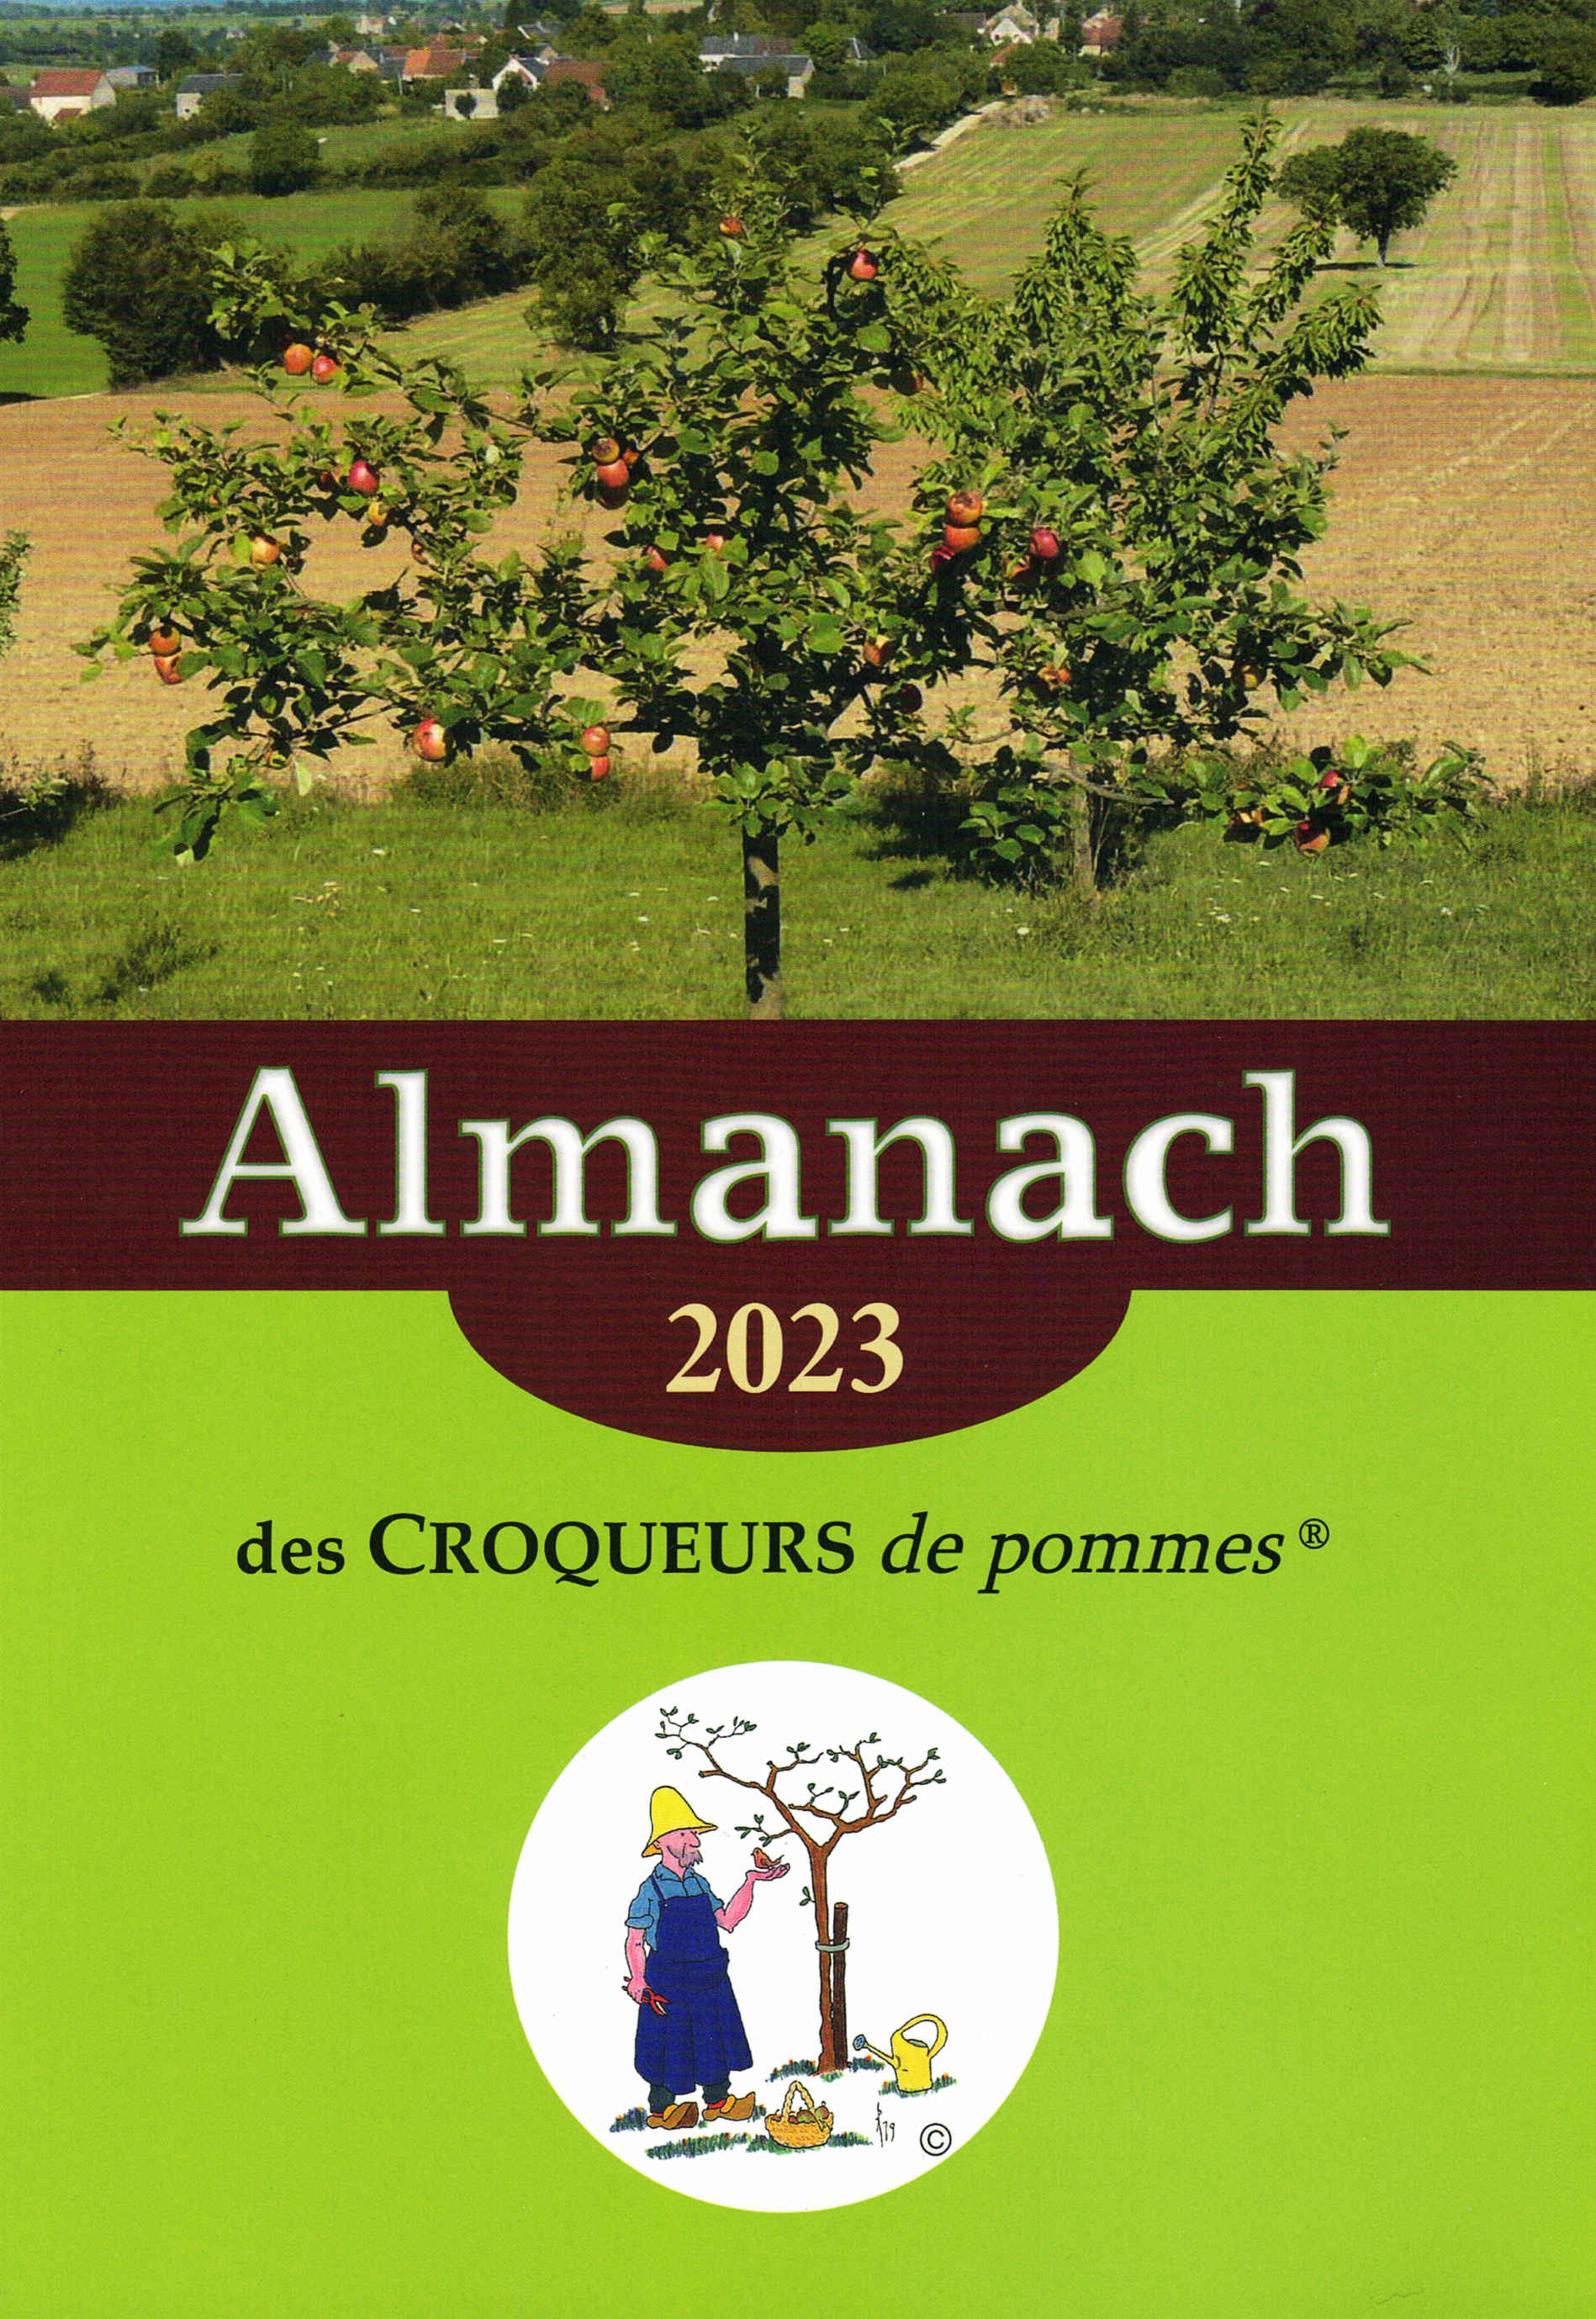 couverture 2020w new